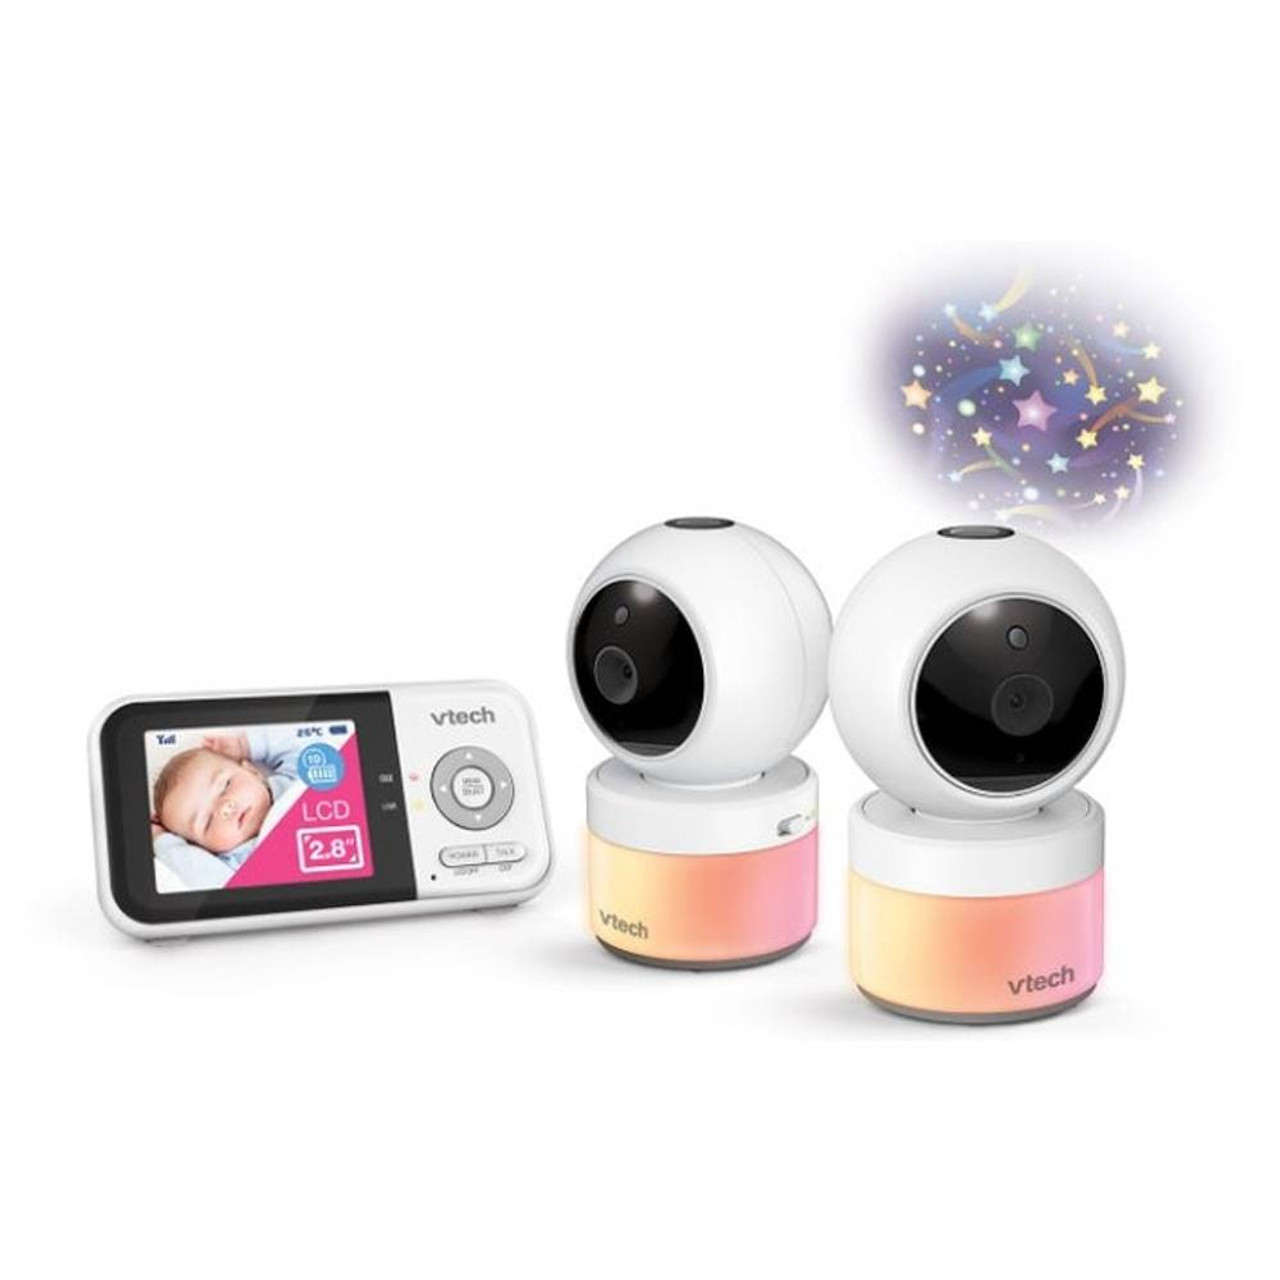 VTech VM2251 Video Baby Monitor review: A best friend for new parents